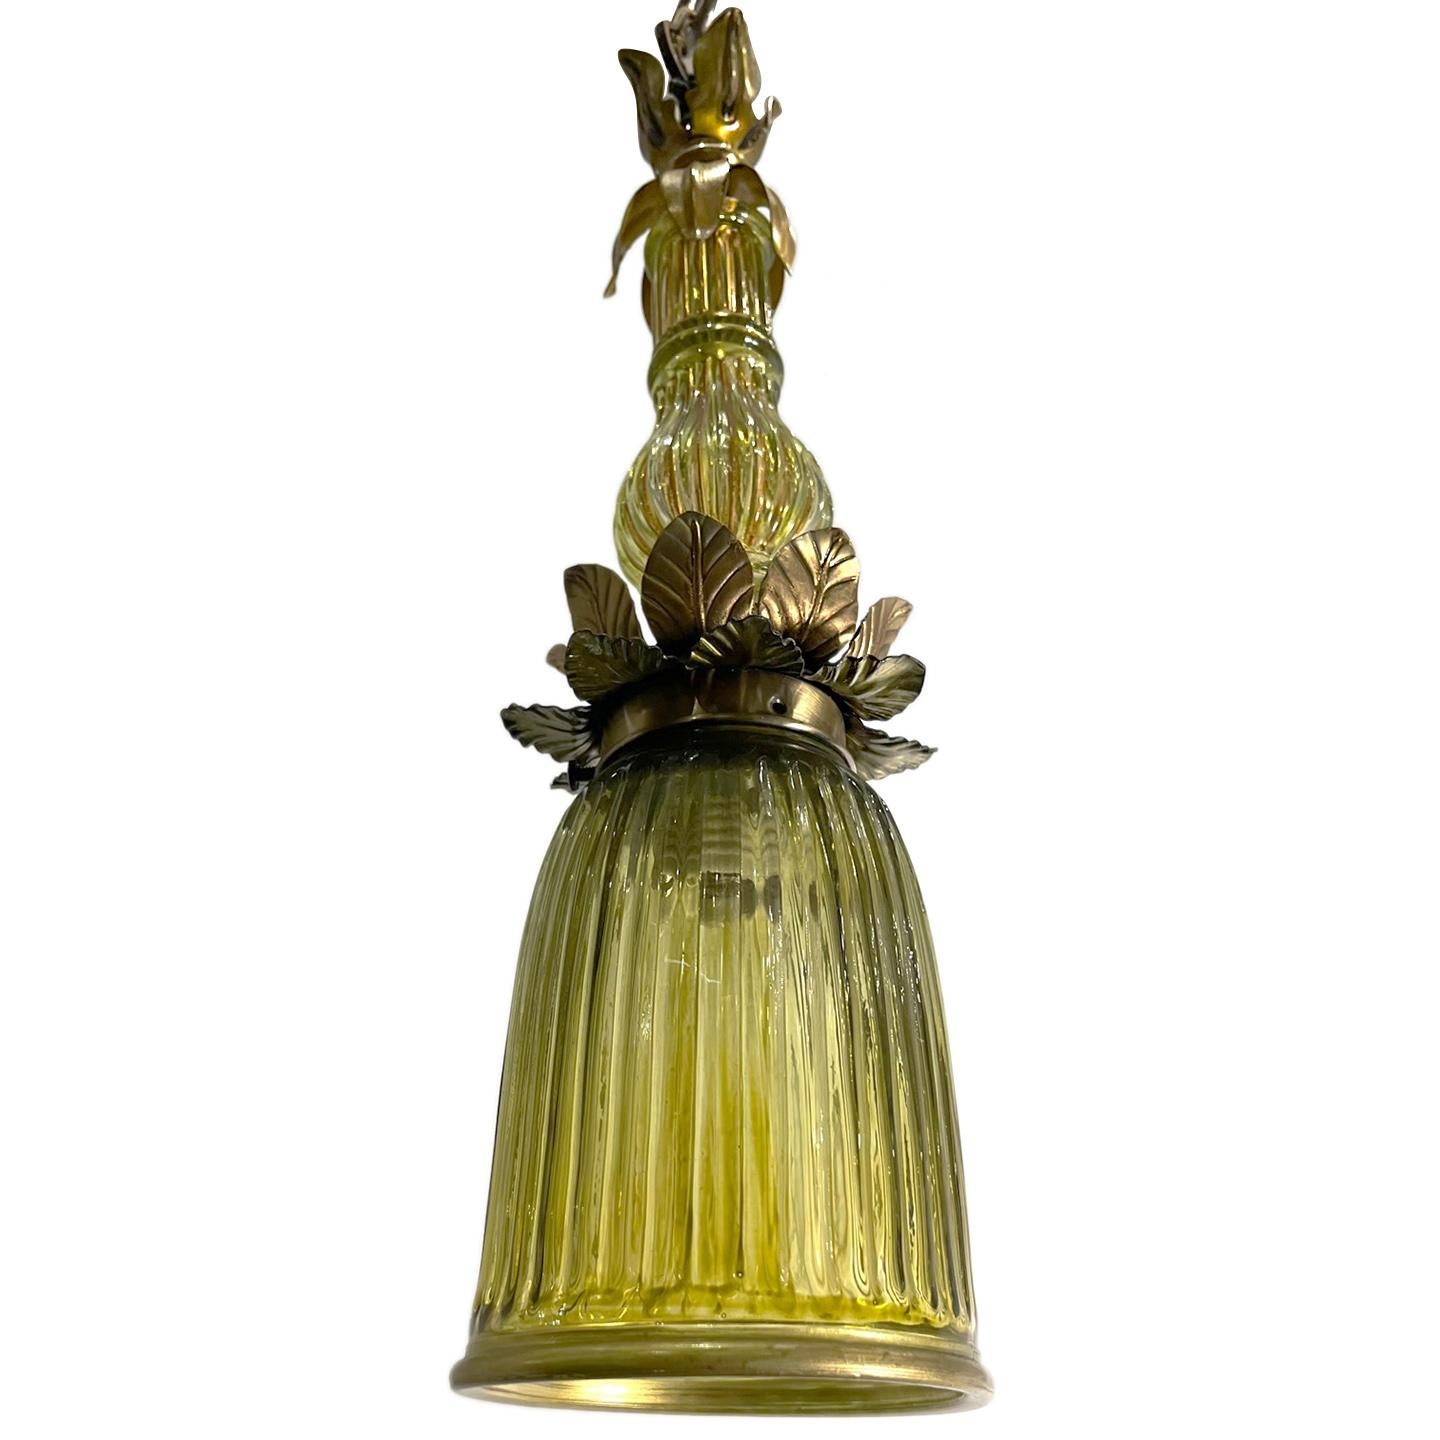 Pair of 1950s Italian gilt metal and olive green light fixtures. Single light. Sold individually.

Measurements:
Drop:17